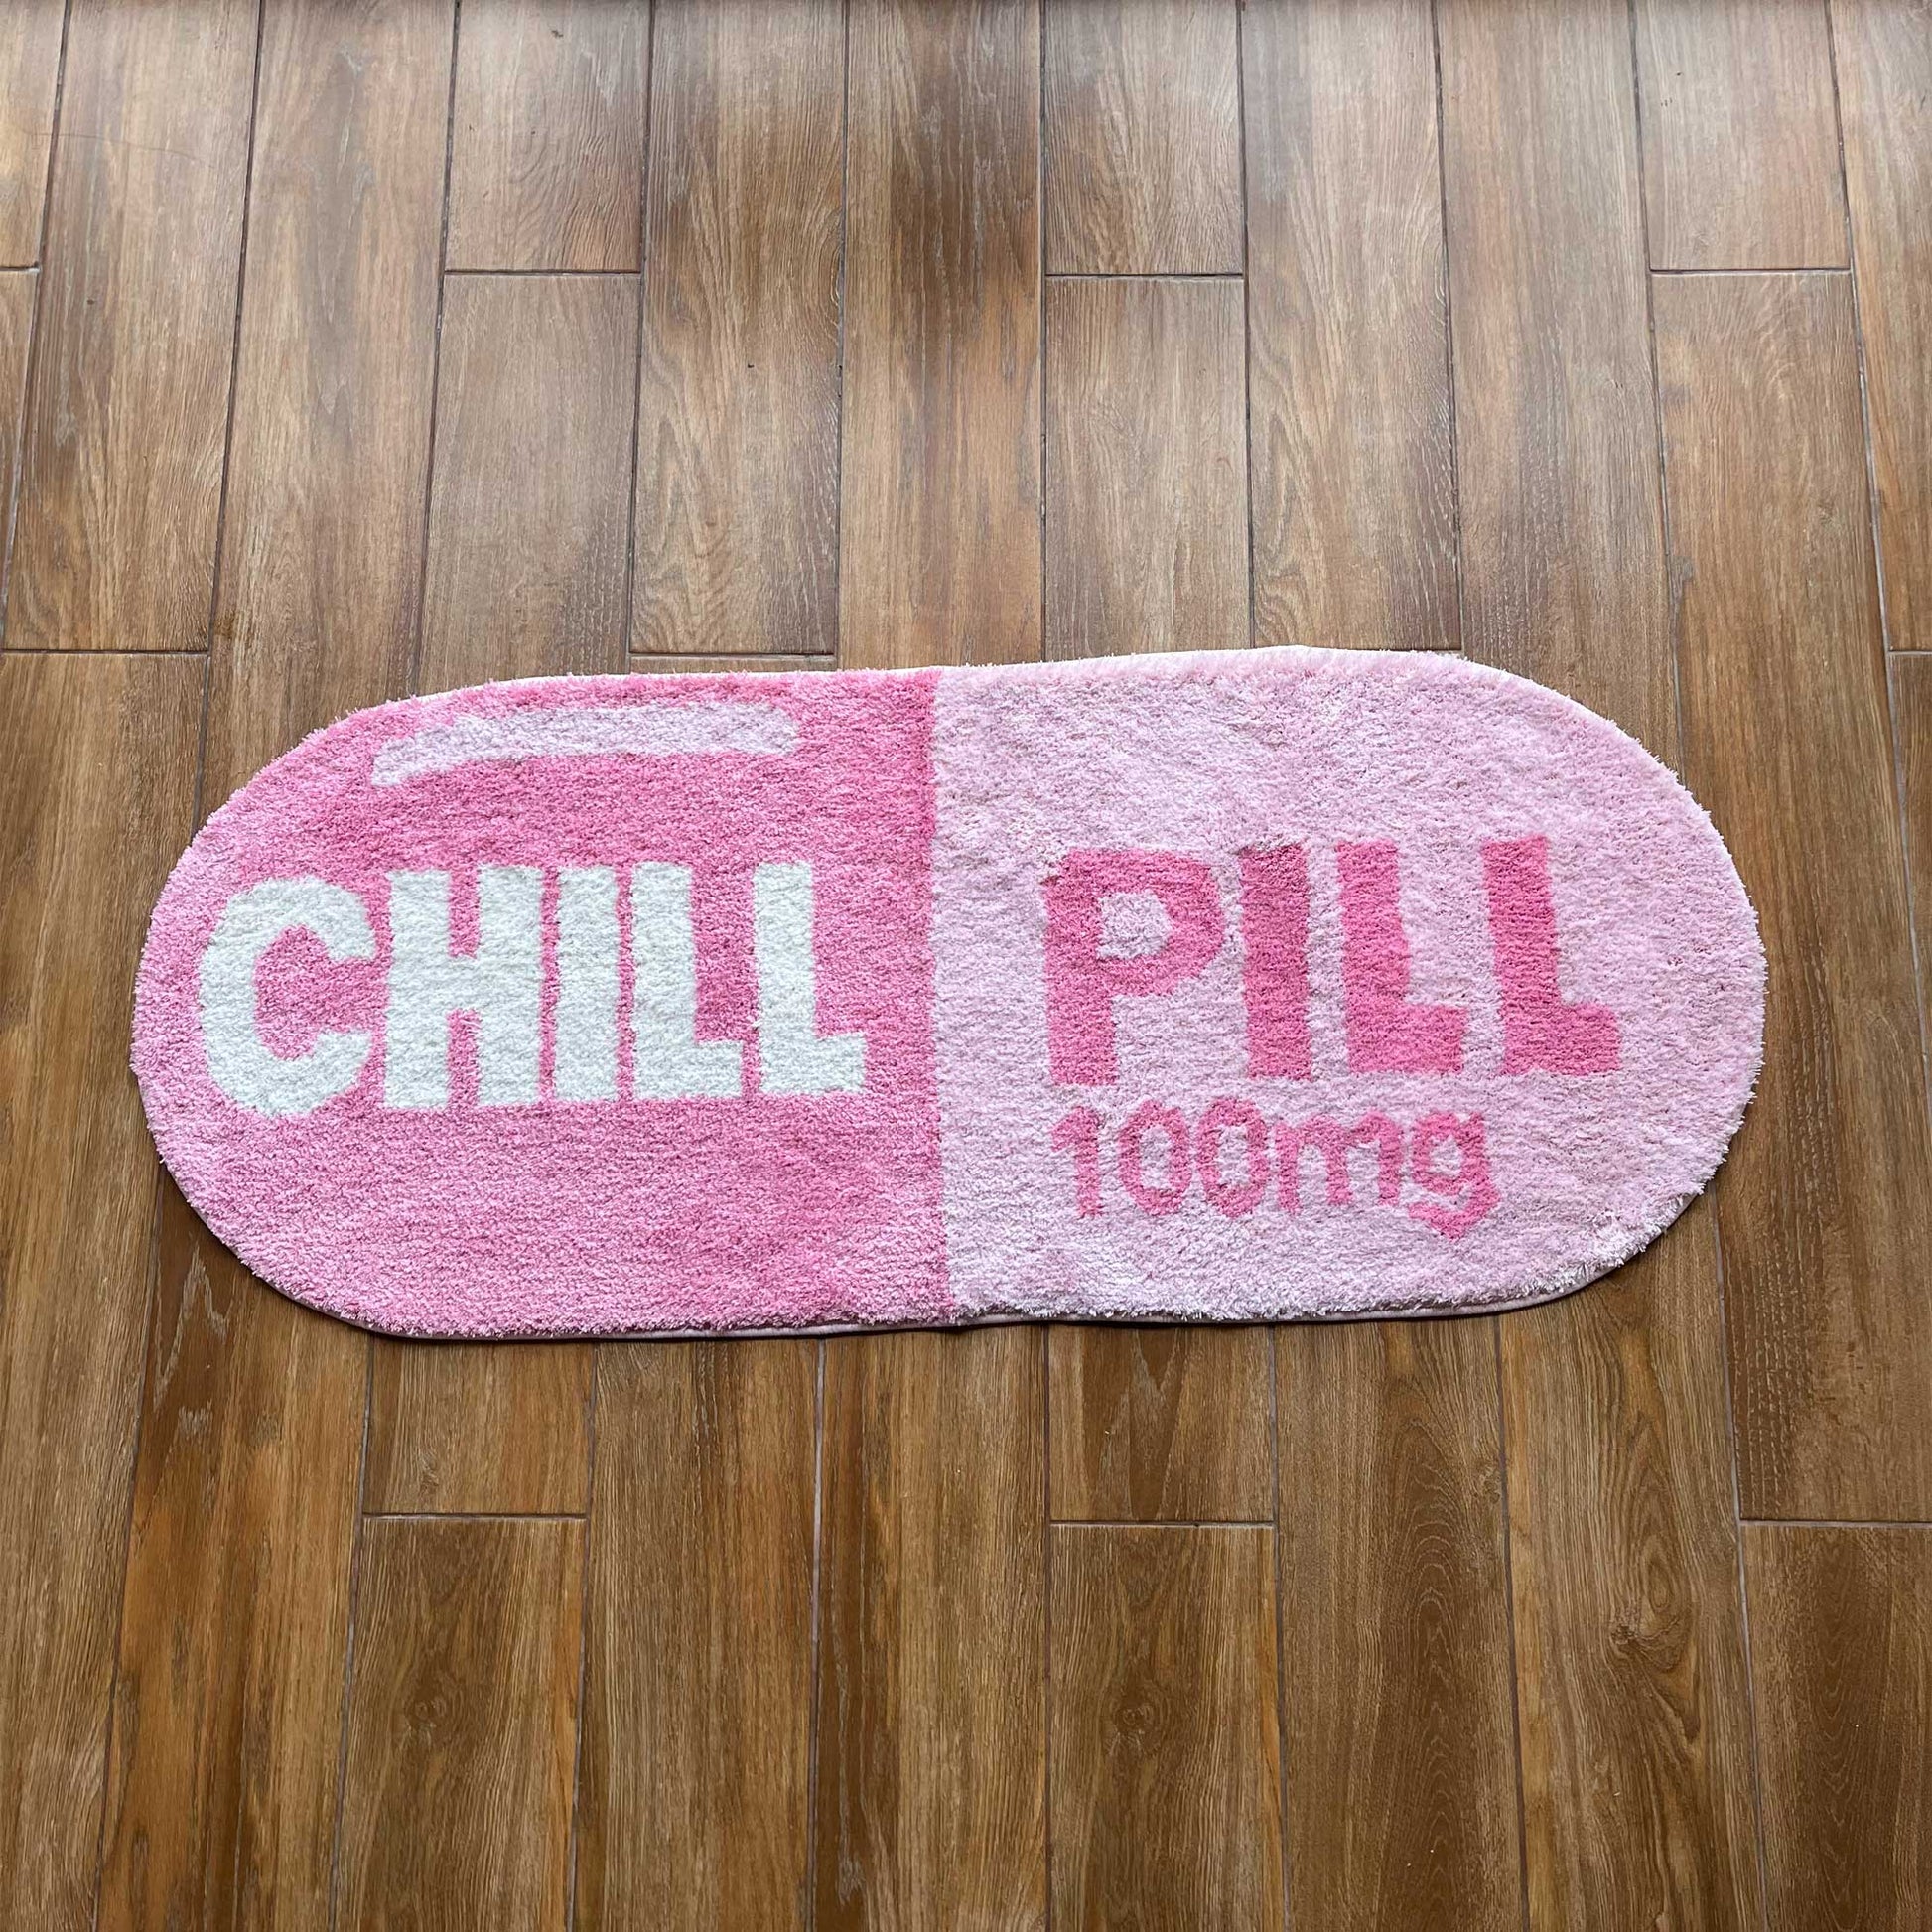 Tufted Rug Pink Chill Pill Rug Front